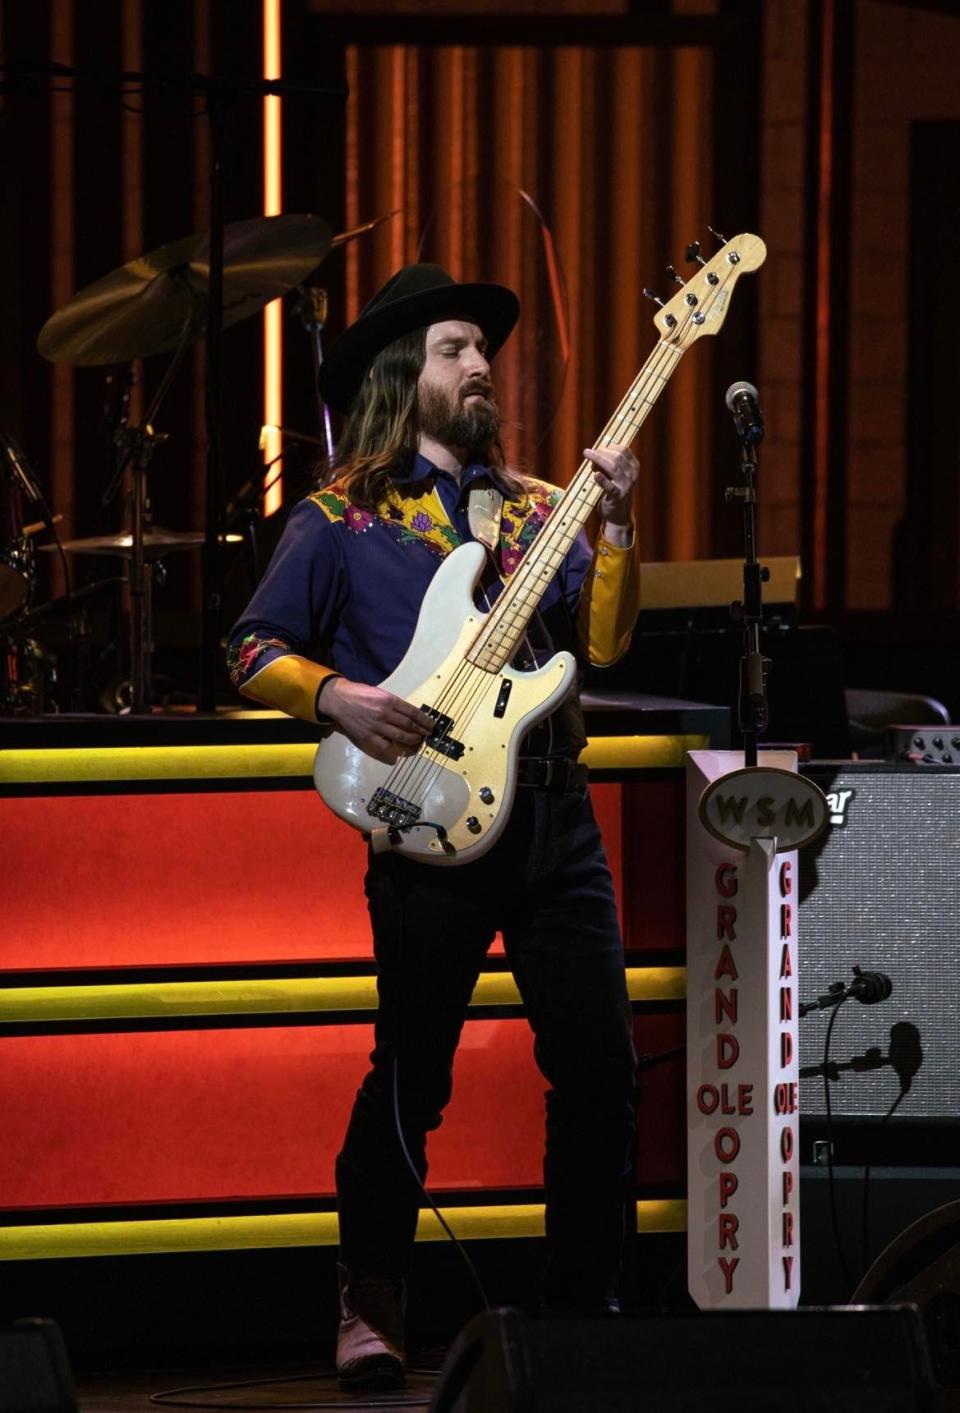 Kevin McManus, a former member of rock bands The Outside Voices and The Buffalo Ryders, is now the bass player for The Shootouts, a Northeast Ohio-based country and honky-tonk band. McManus is shown performing with the band last month at the Grand Ole Opry in Nashville.